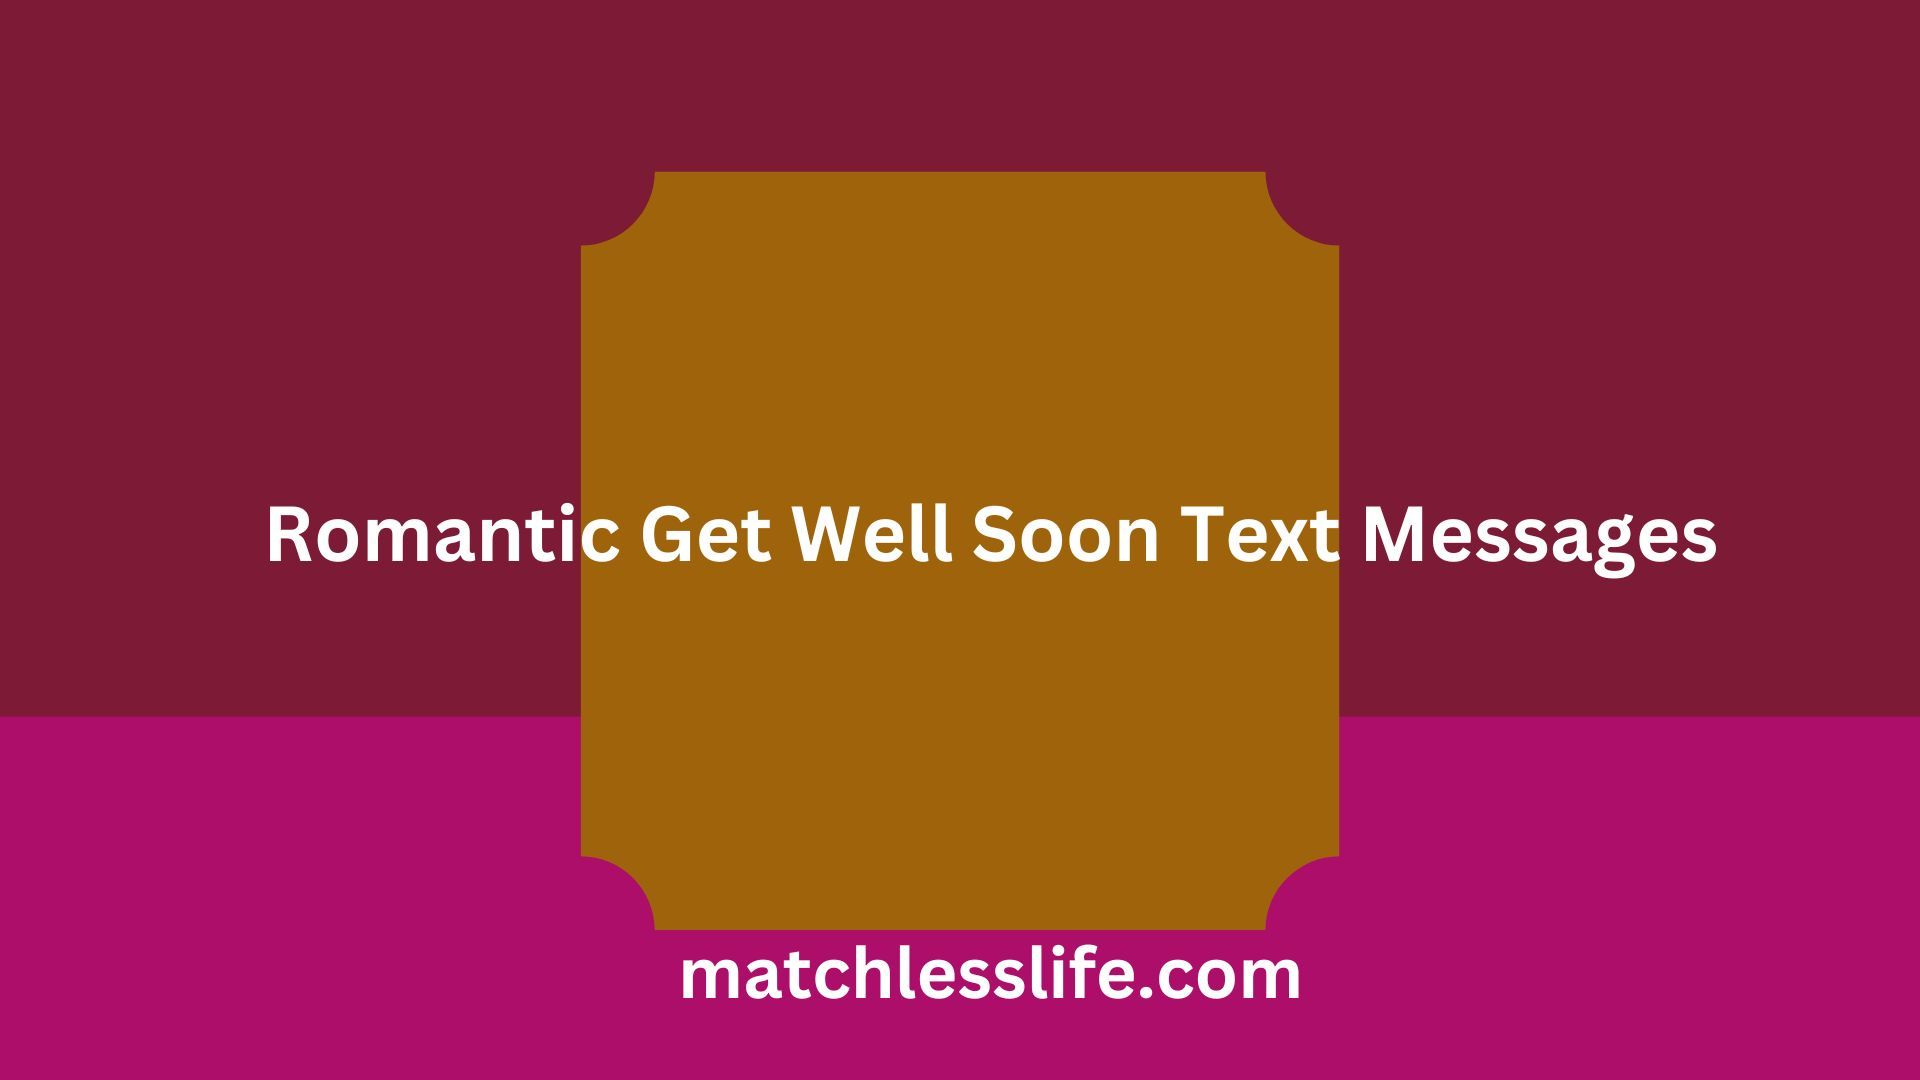 Romantic Get Well Soon Text Messages